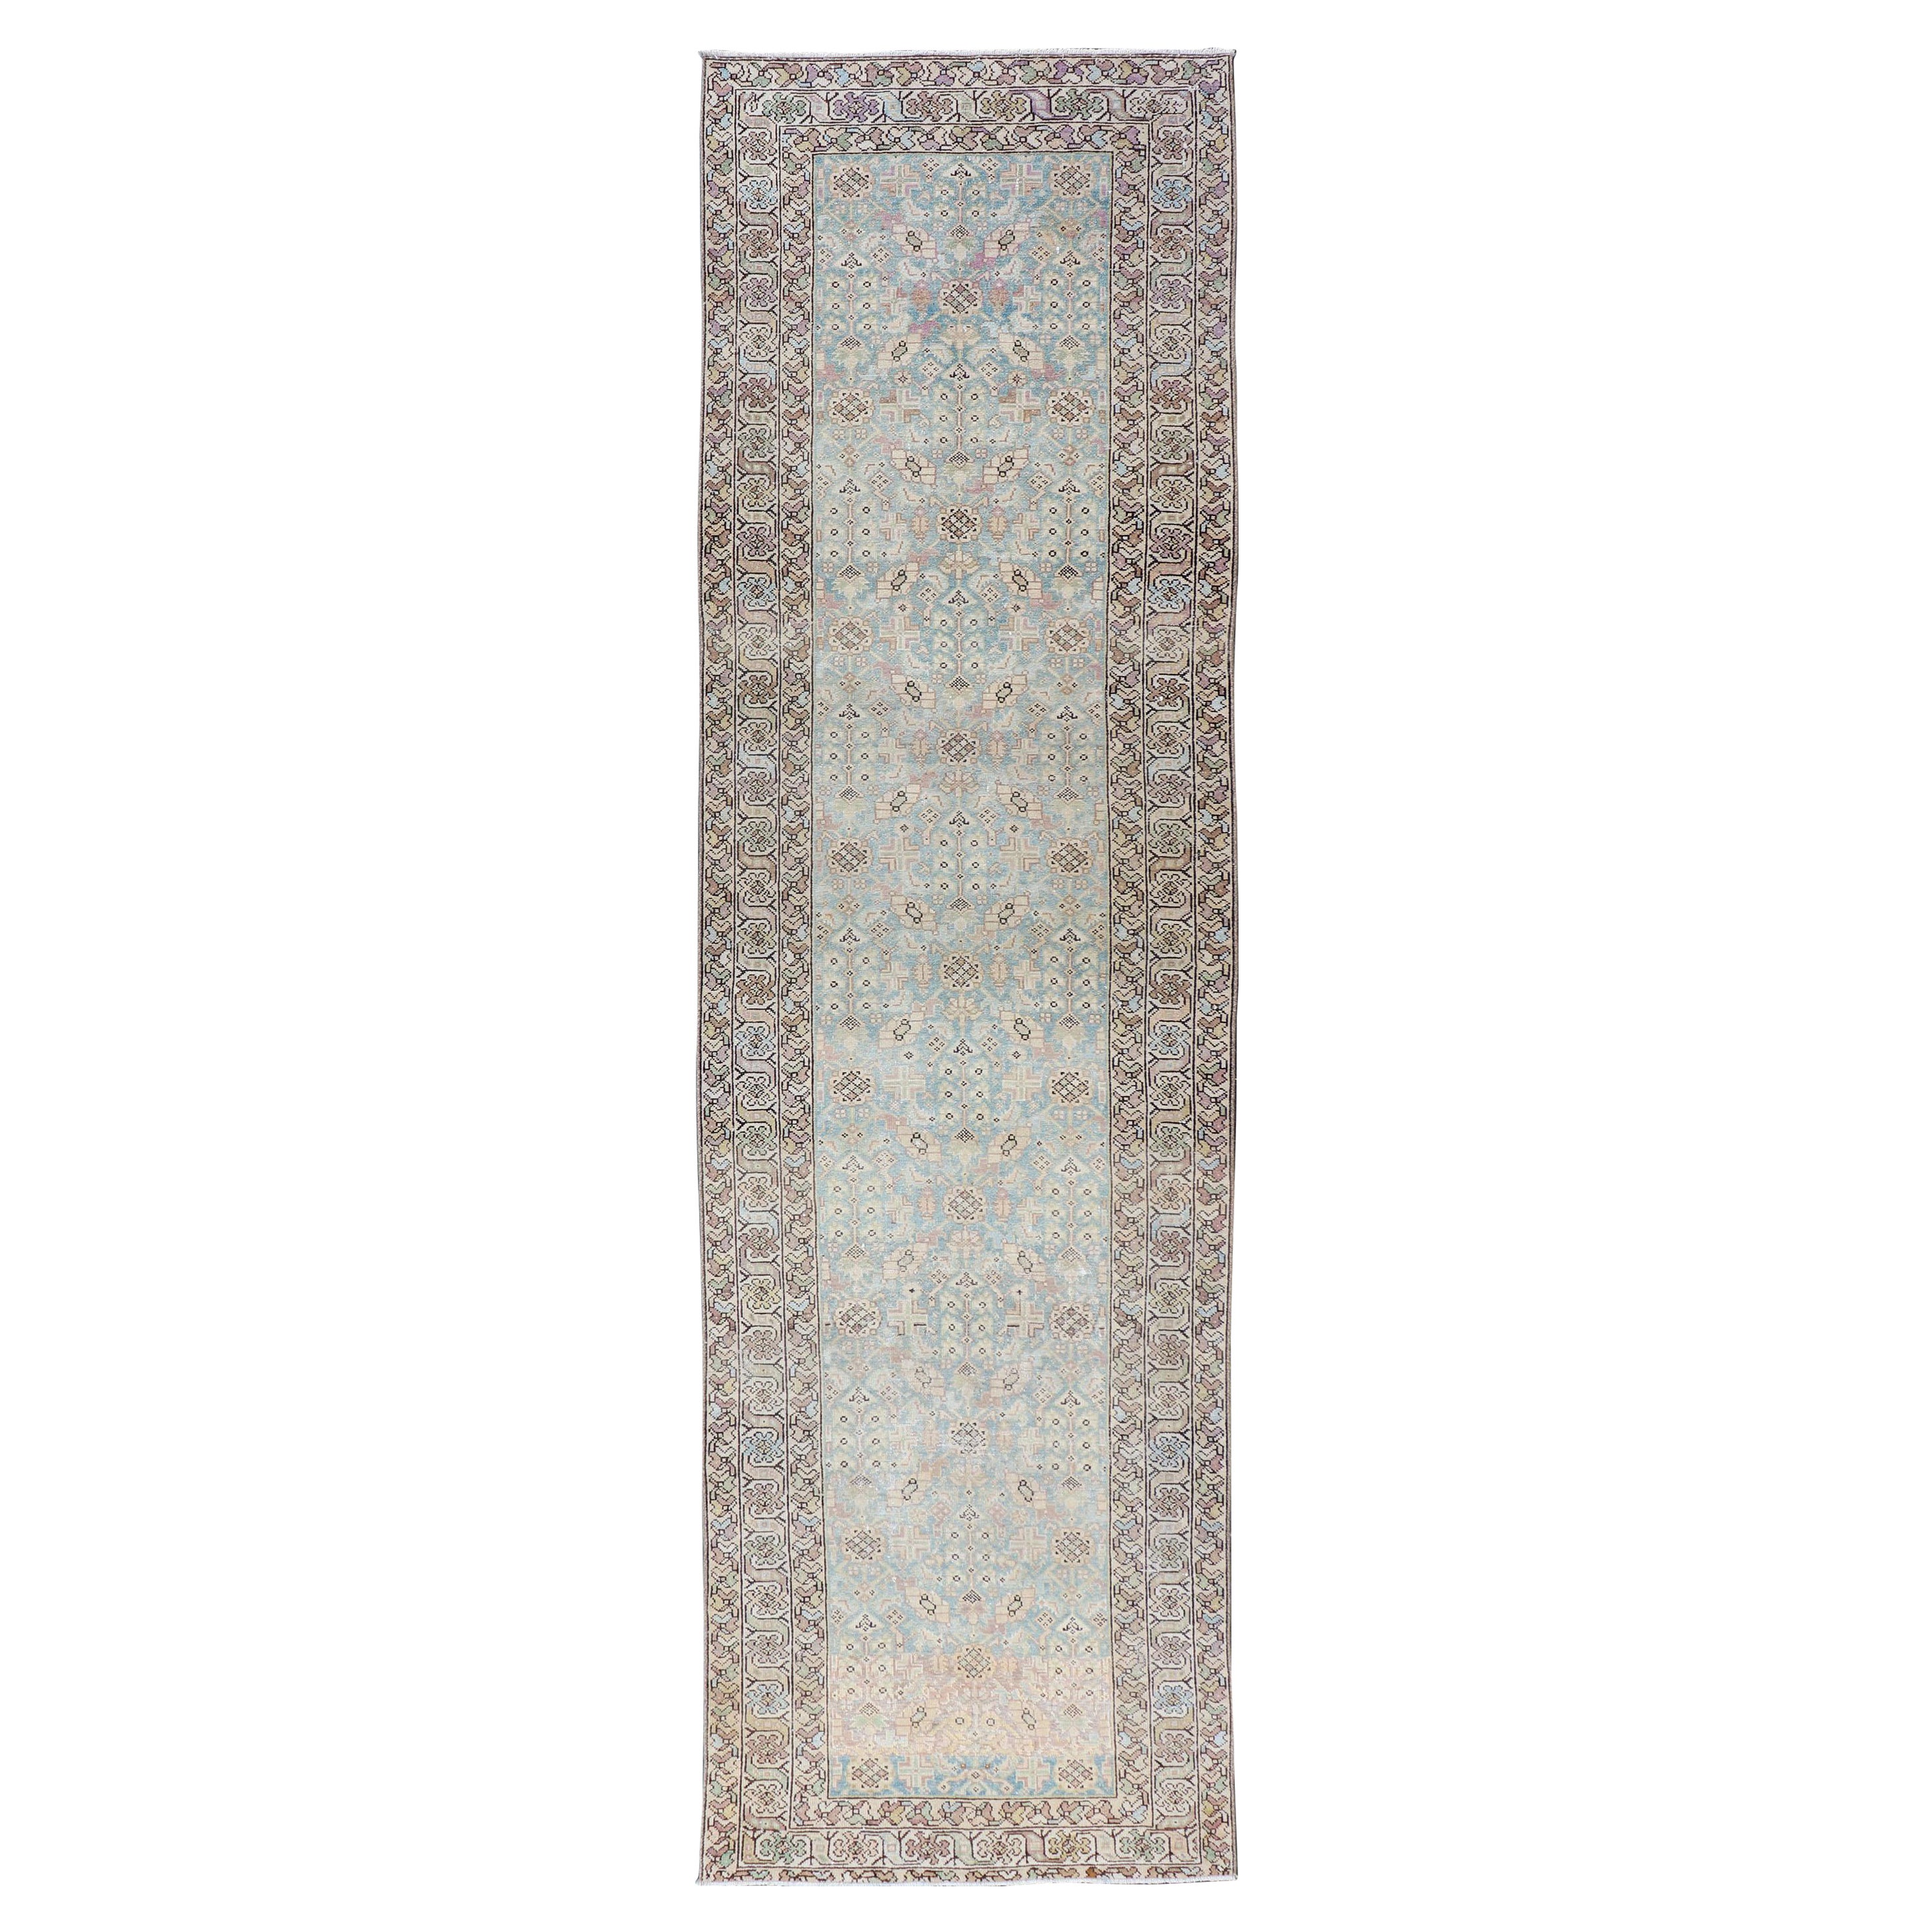 Antique Persian Malayer Runner with Sub-Geometric Design in Blue and Brown Tones